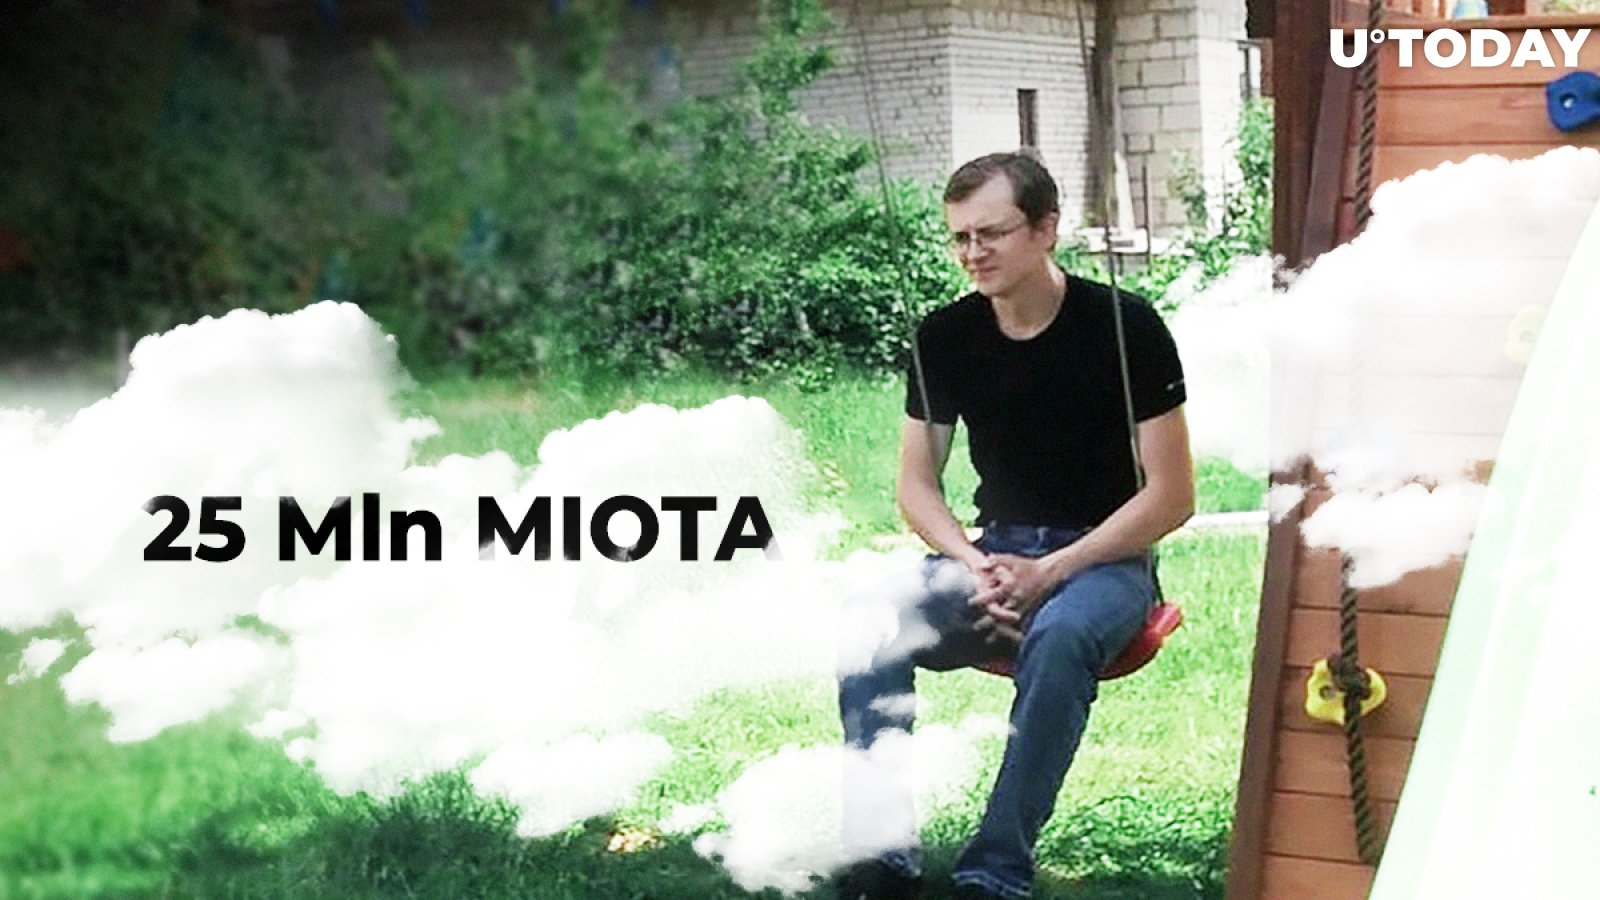 IOTA Co-Founder Demands 25 Mln MIOTA from David Sonstebo, Insisting He Resign